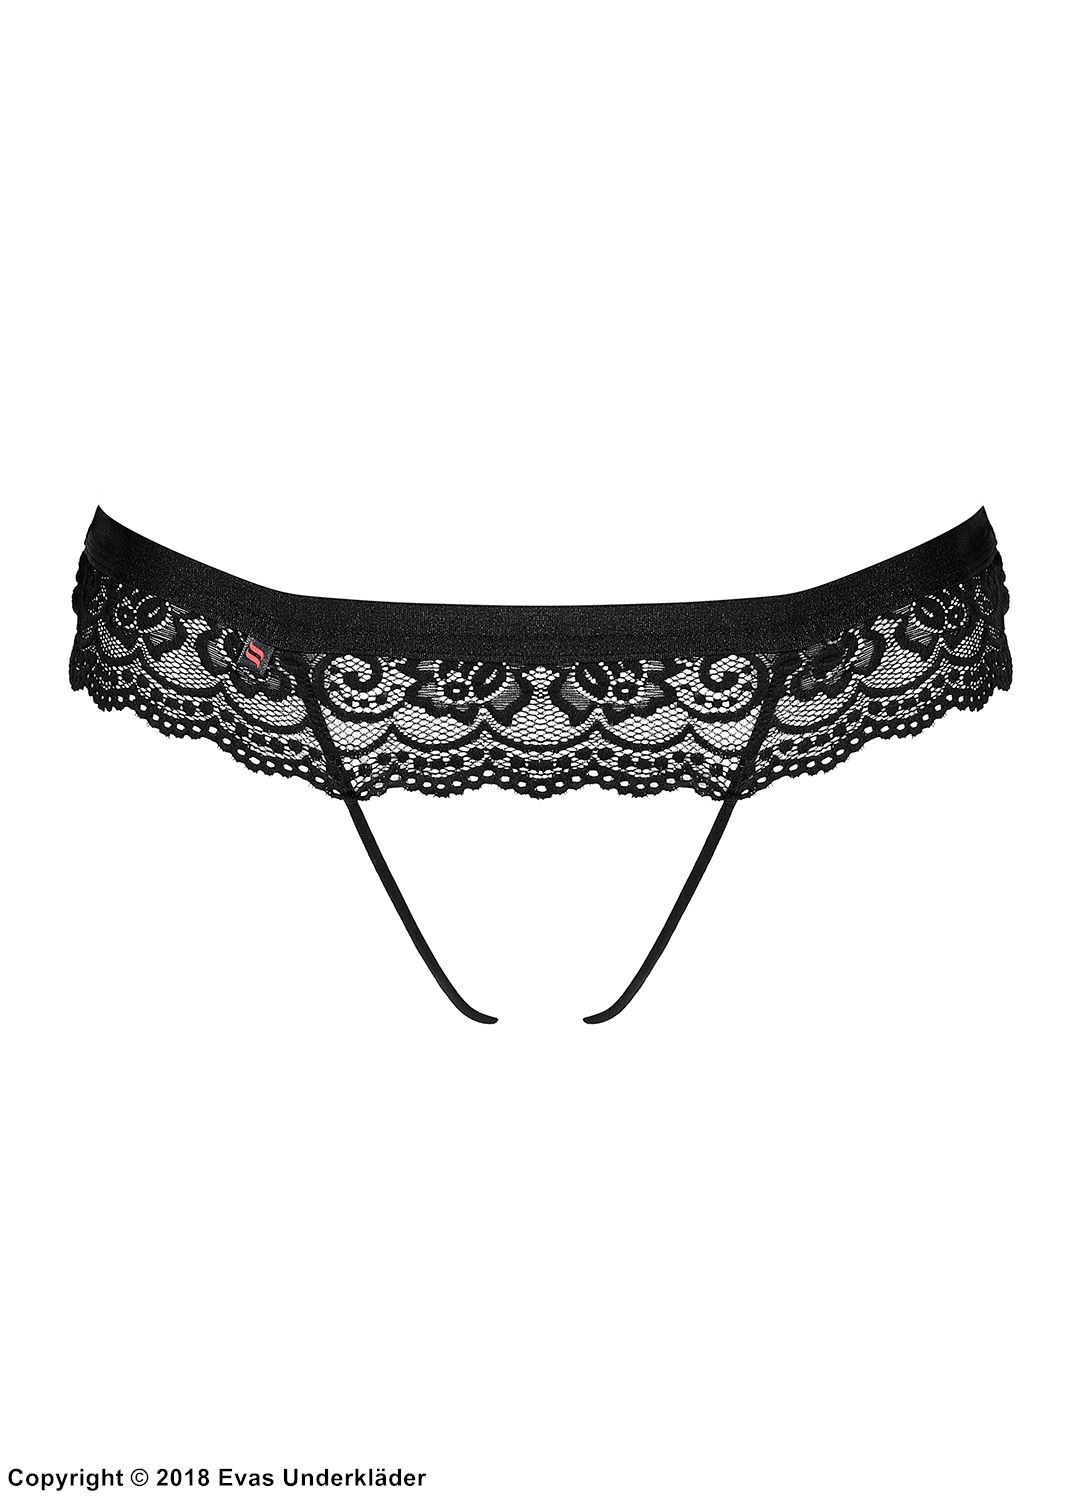 Revealing Panties Lace Open Crotch Thin Straps